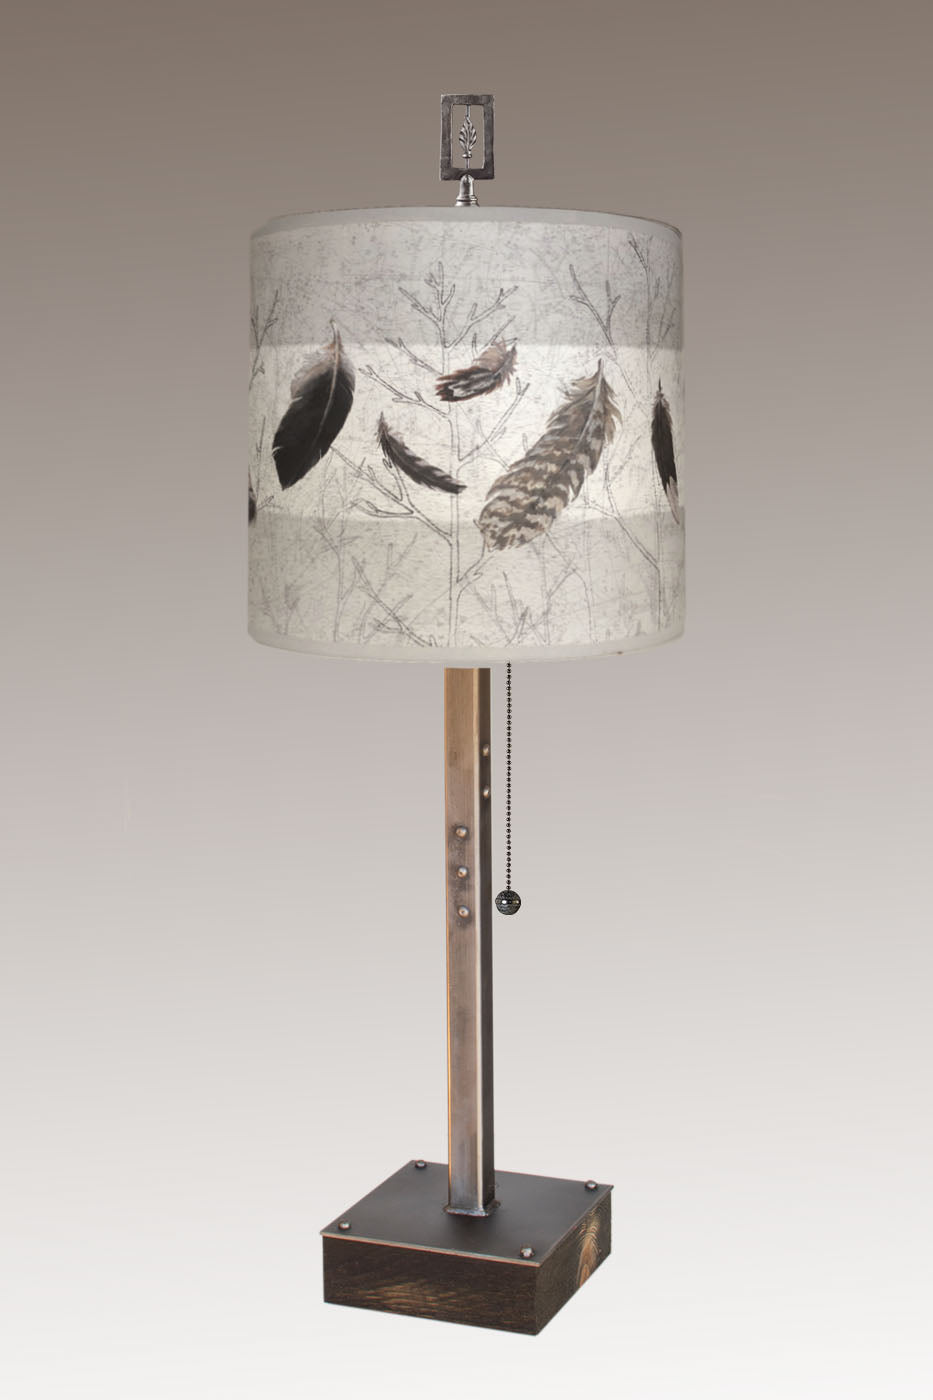 Janna Ugone & Co Table Lamps Steel Table Lamp on Wood with Medium Drum Shade in Feathers in Pebble